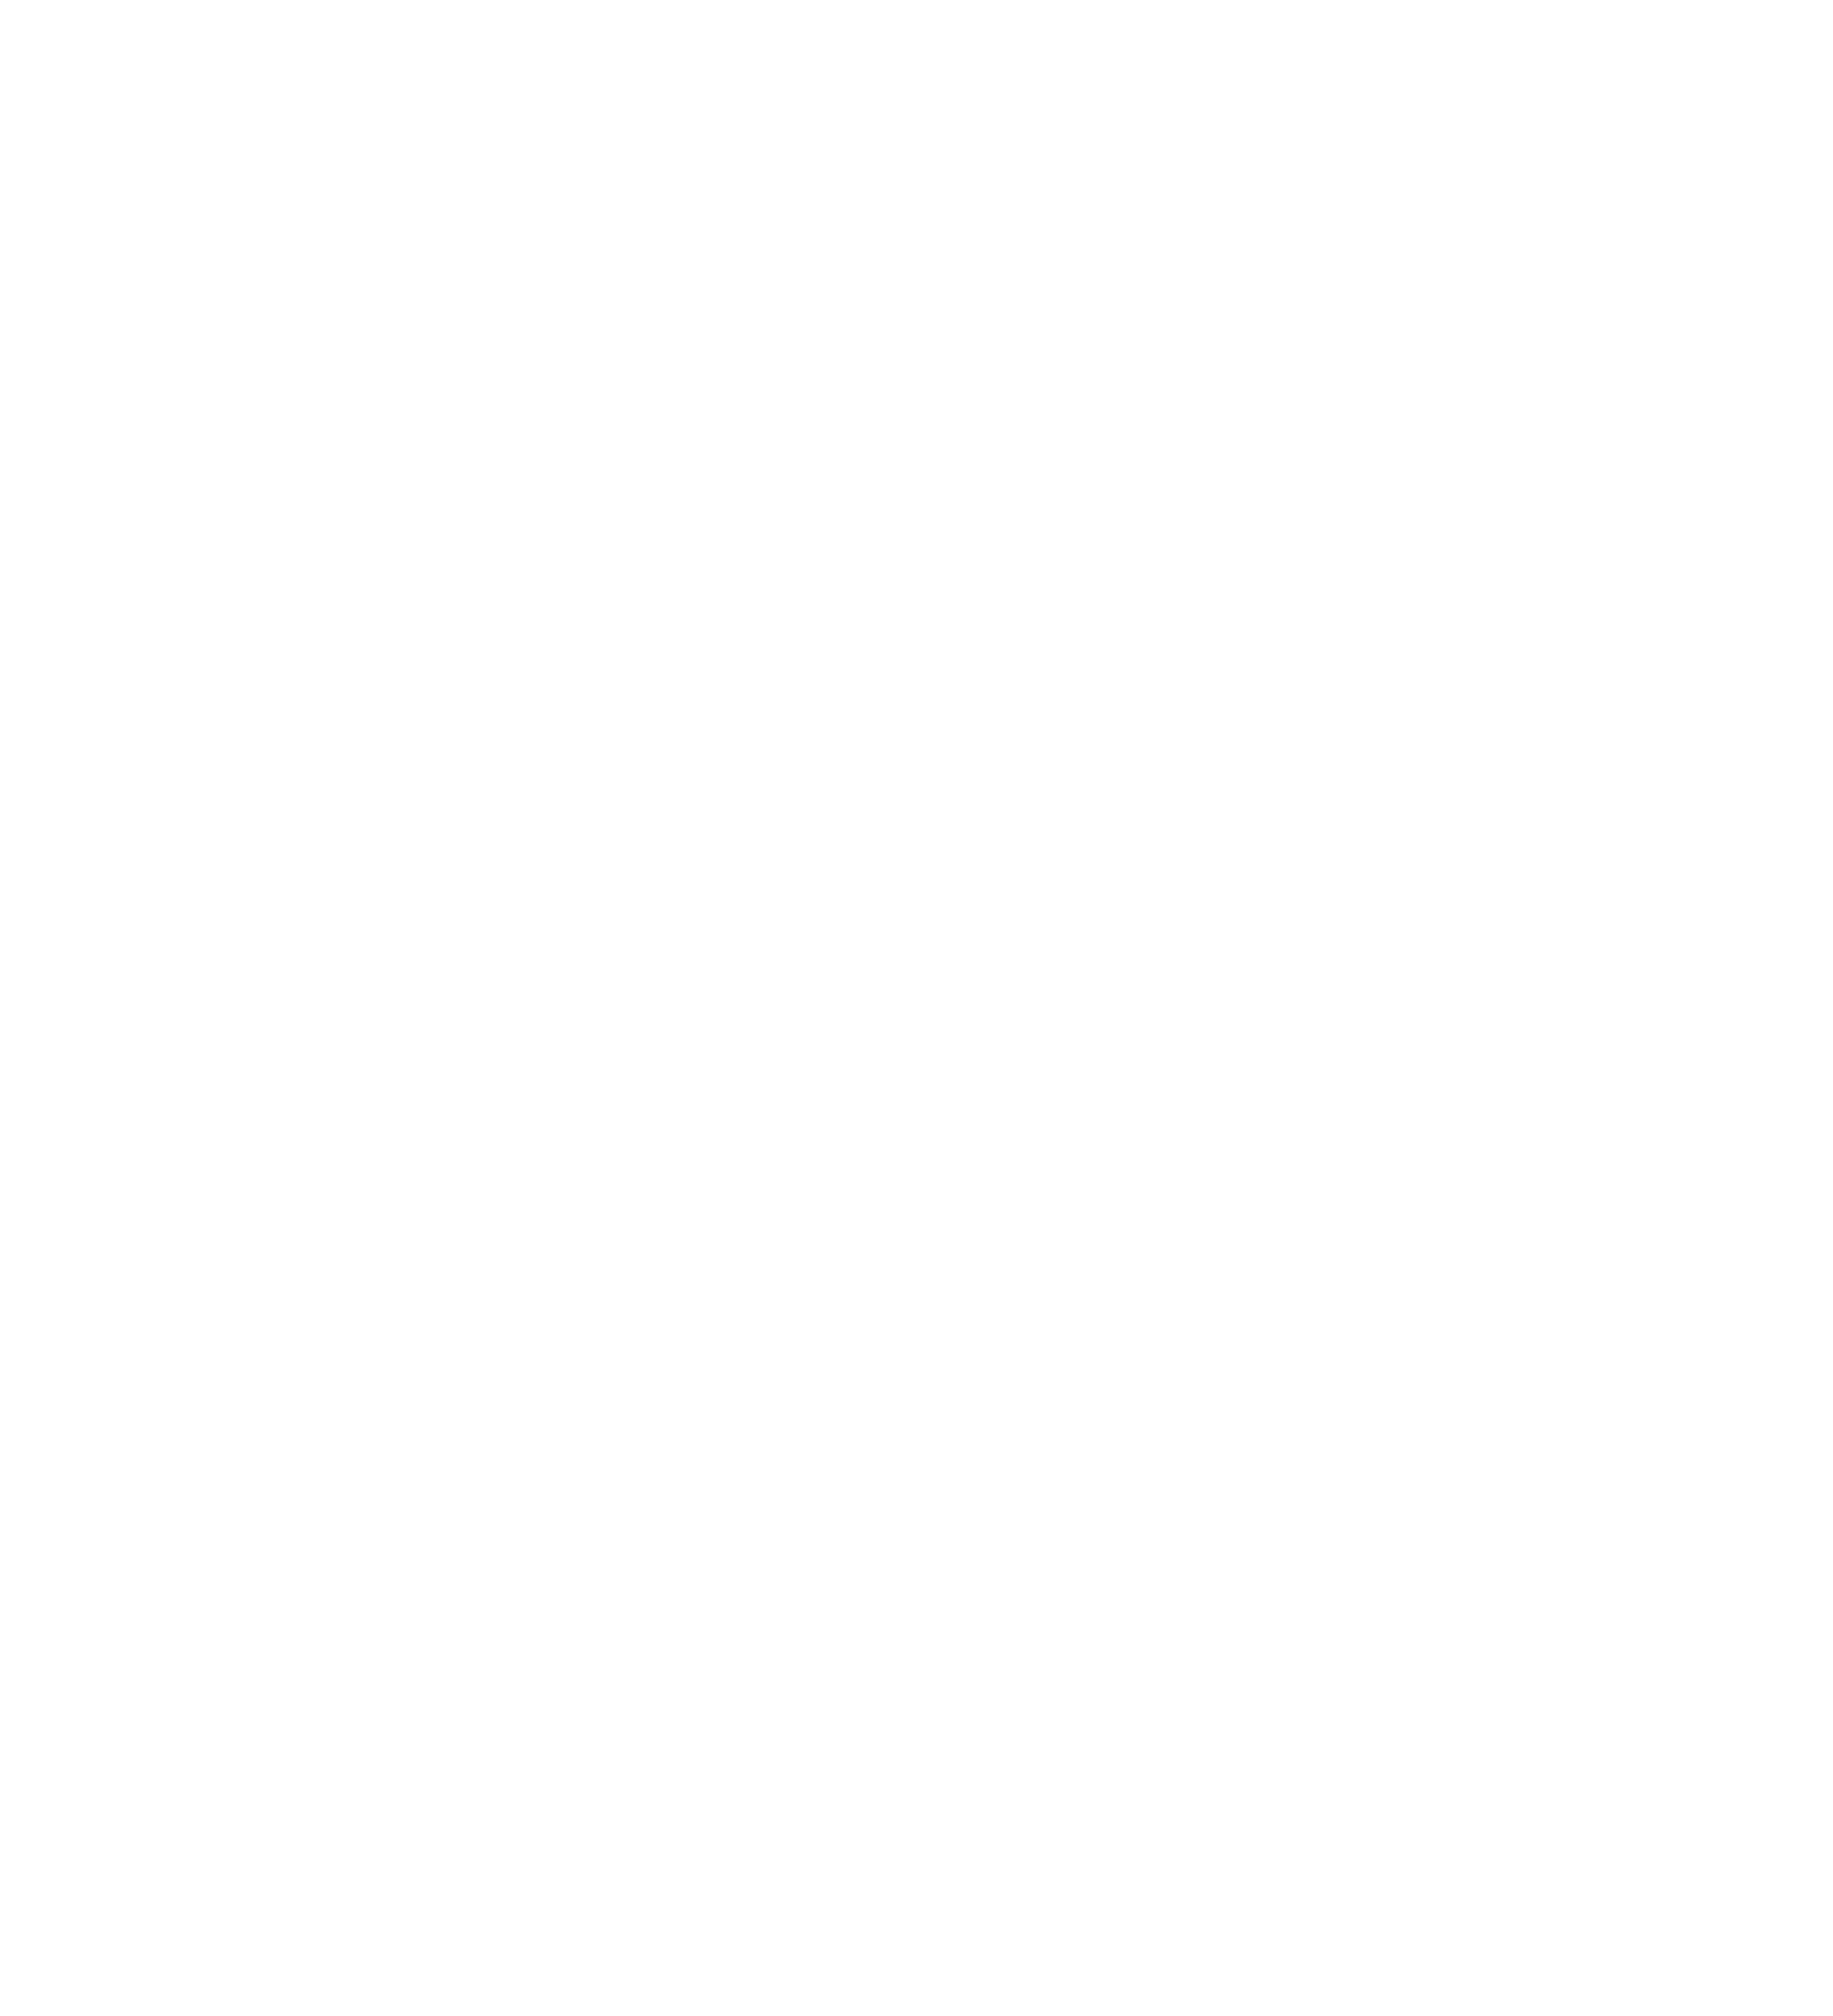 Overview of main features of Rapha Rover